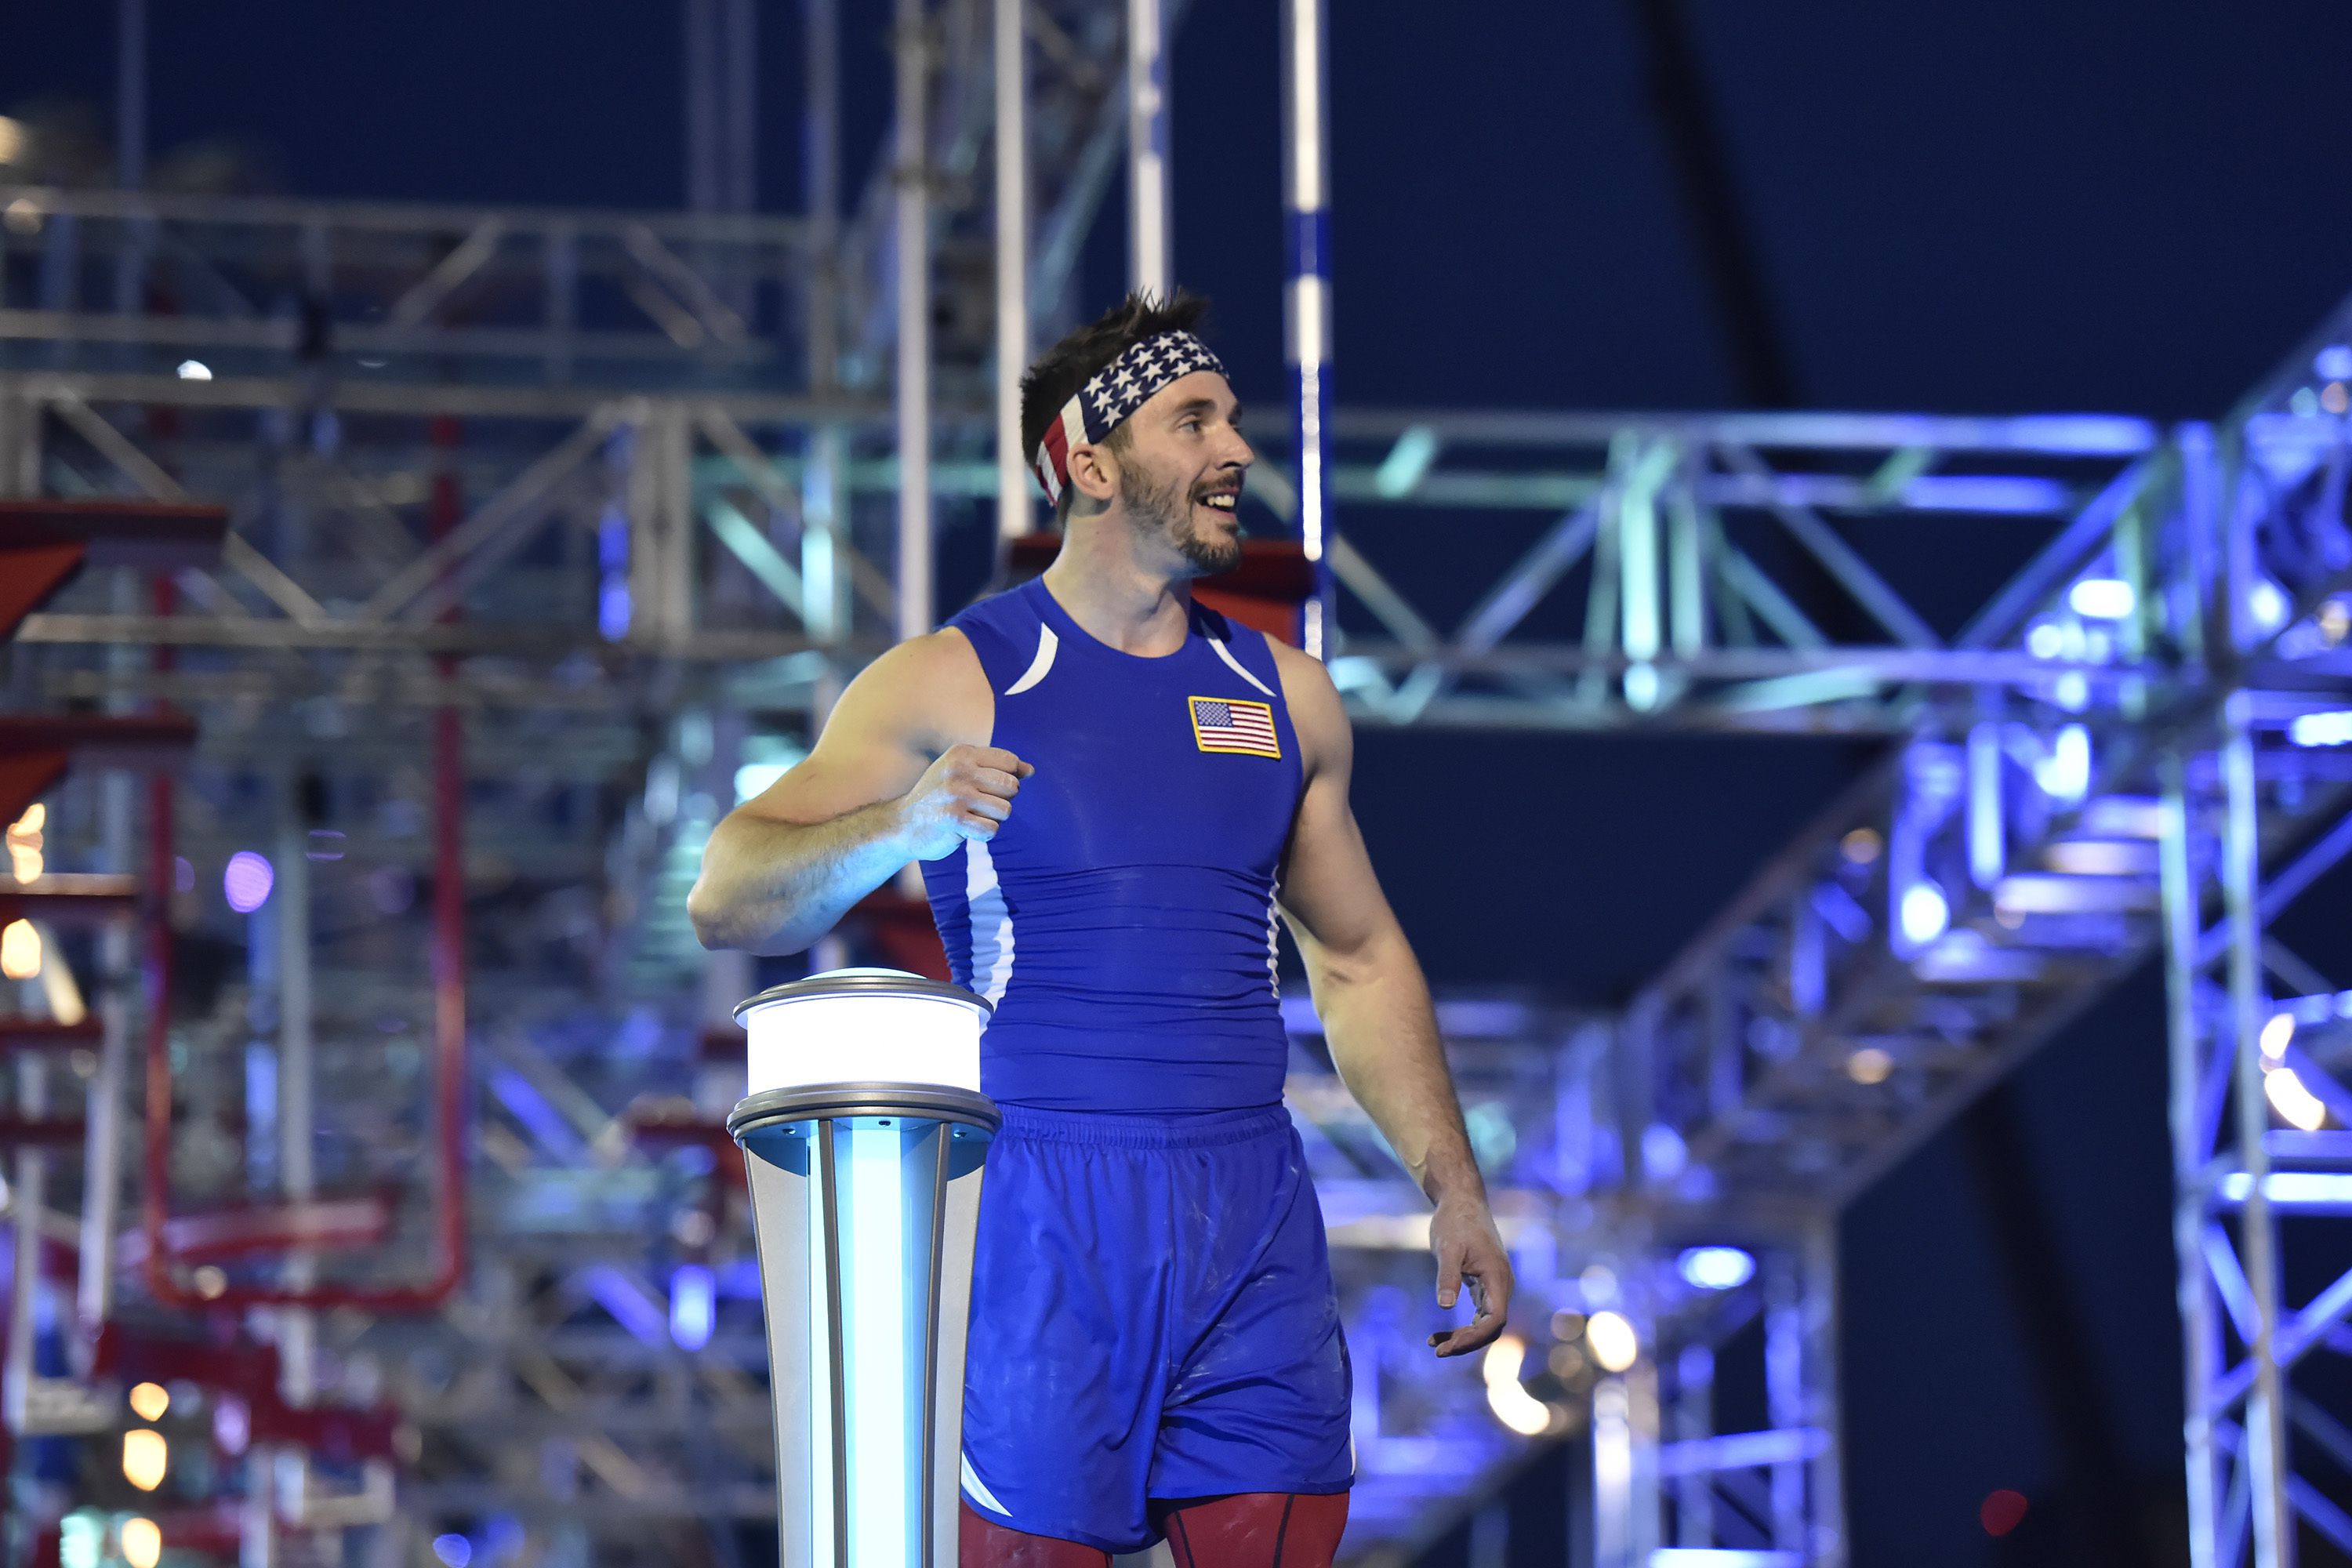 American Ninja Porn - American Ninja Warrior' champ charged with luring a South Jersey teen for  sex, porn